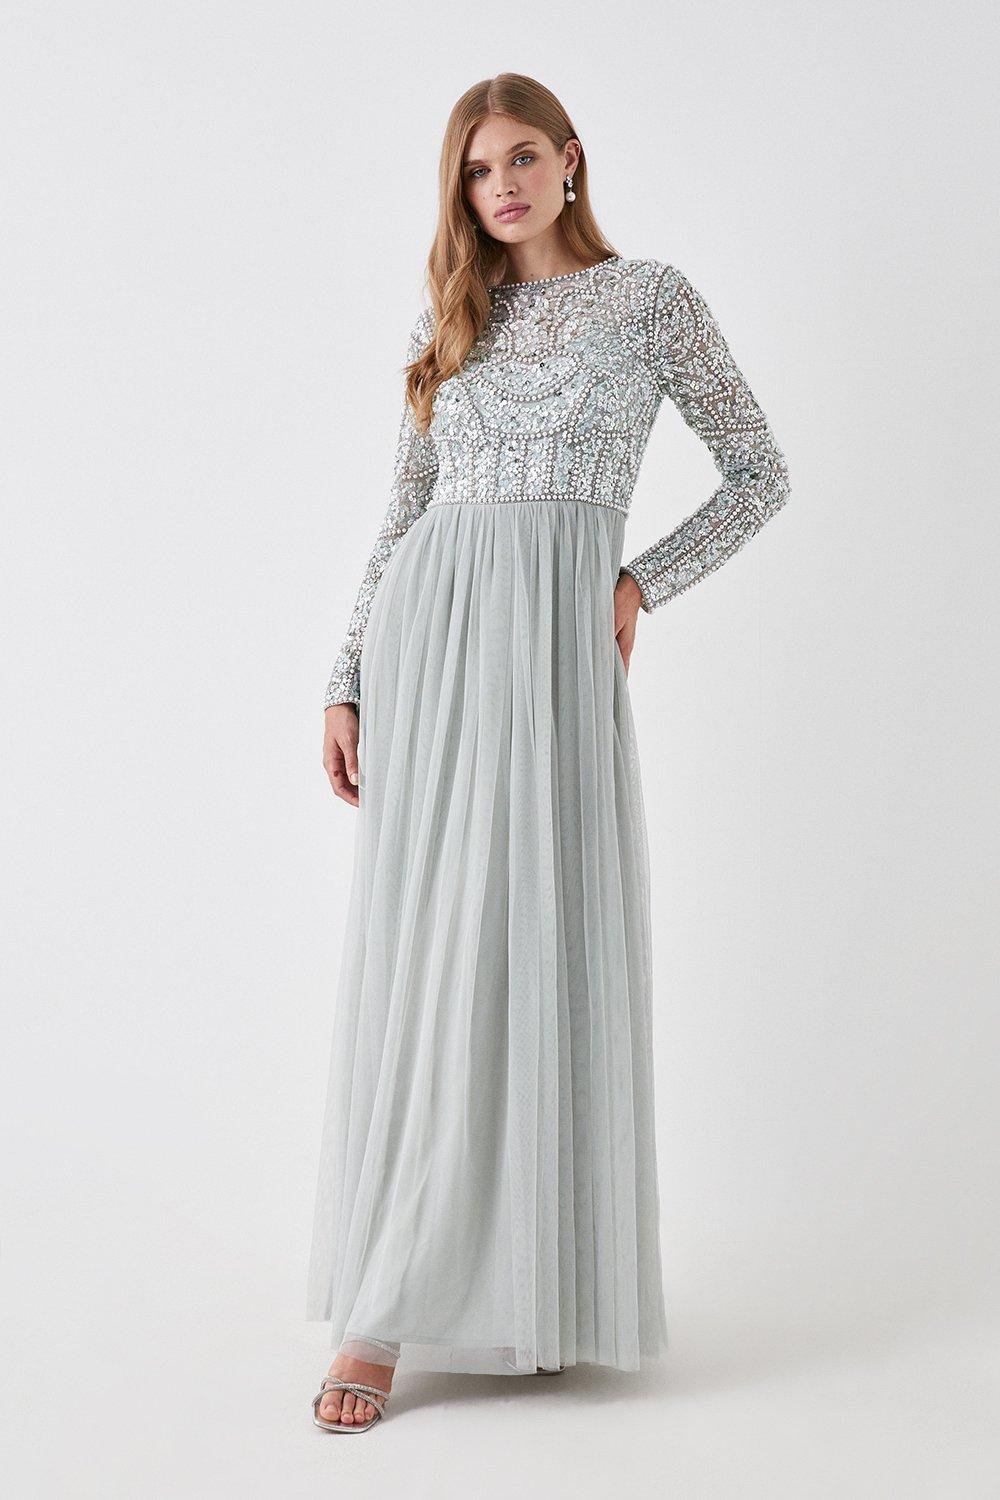 Floral Pearl Long Sleeve Two In One Bridesmaids Dress - Sage